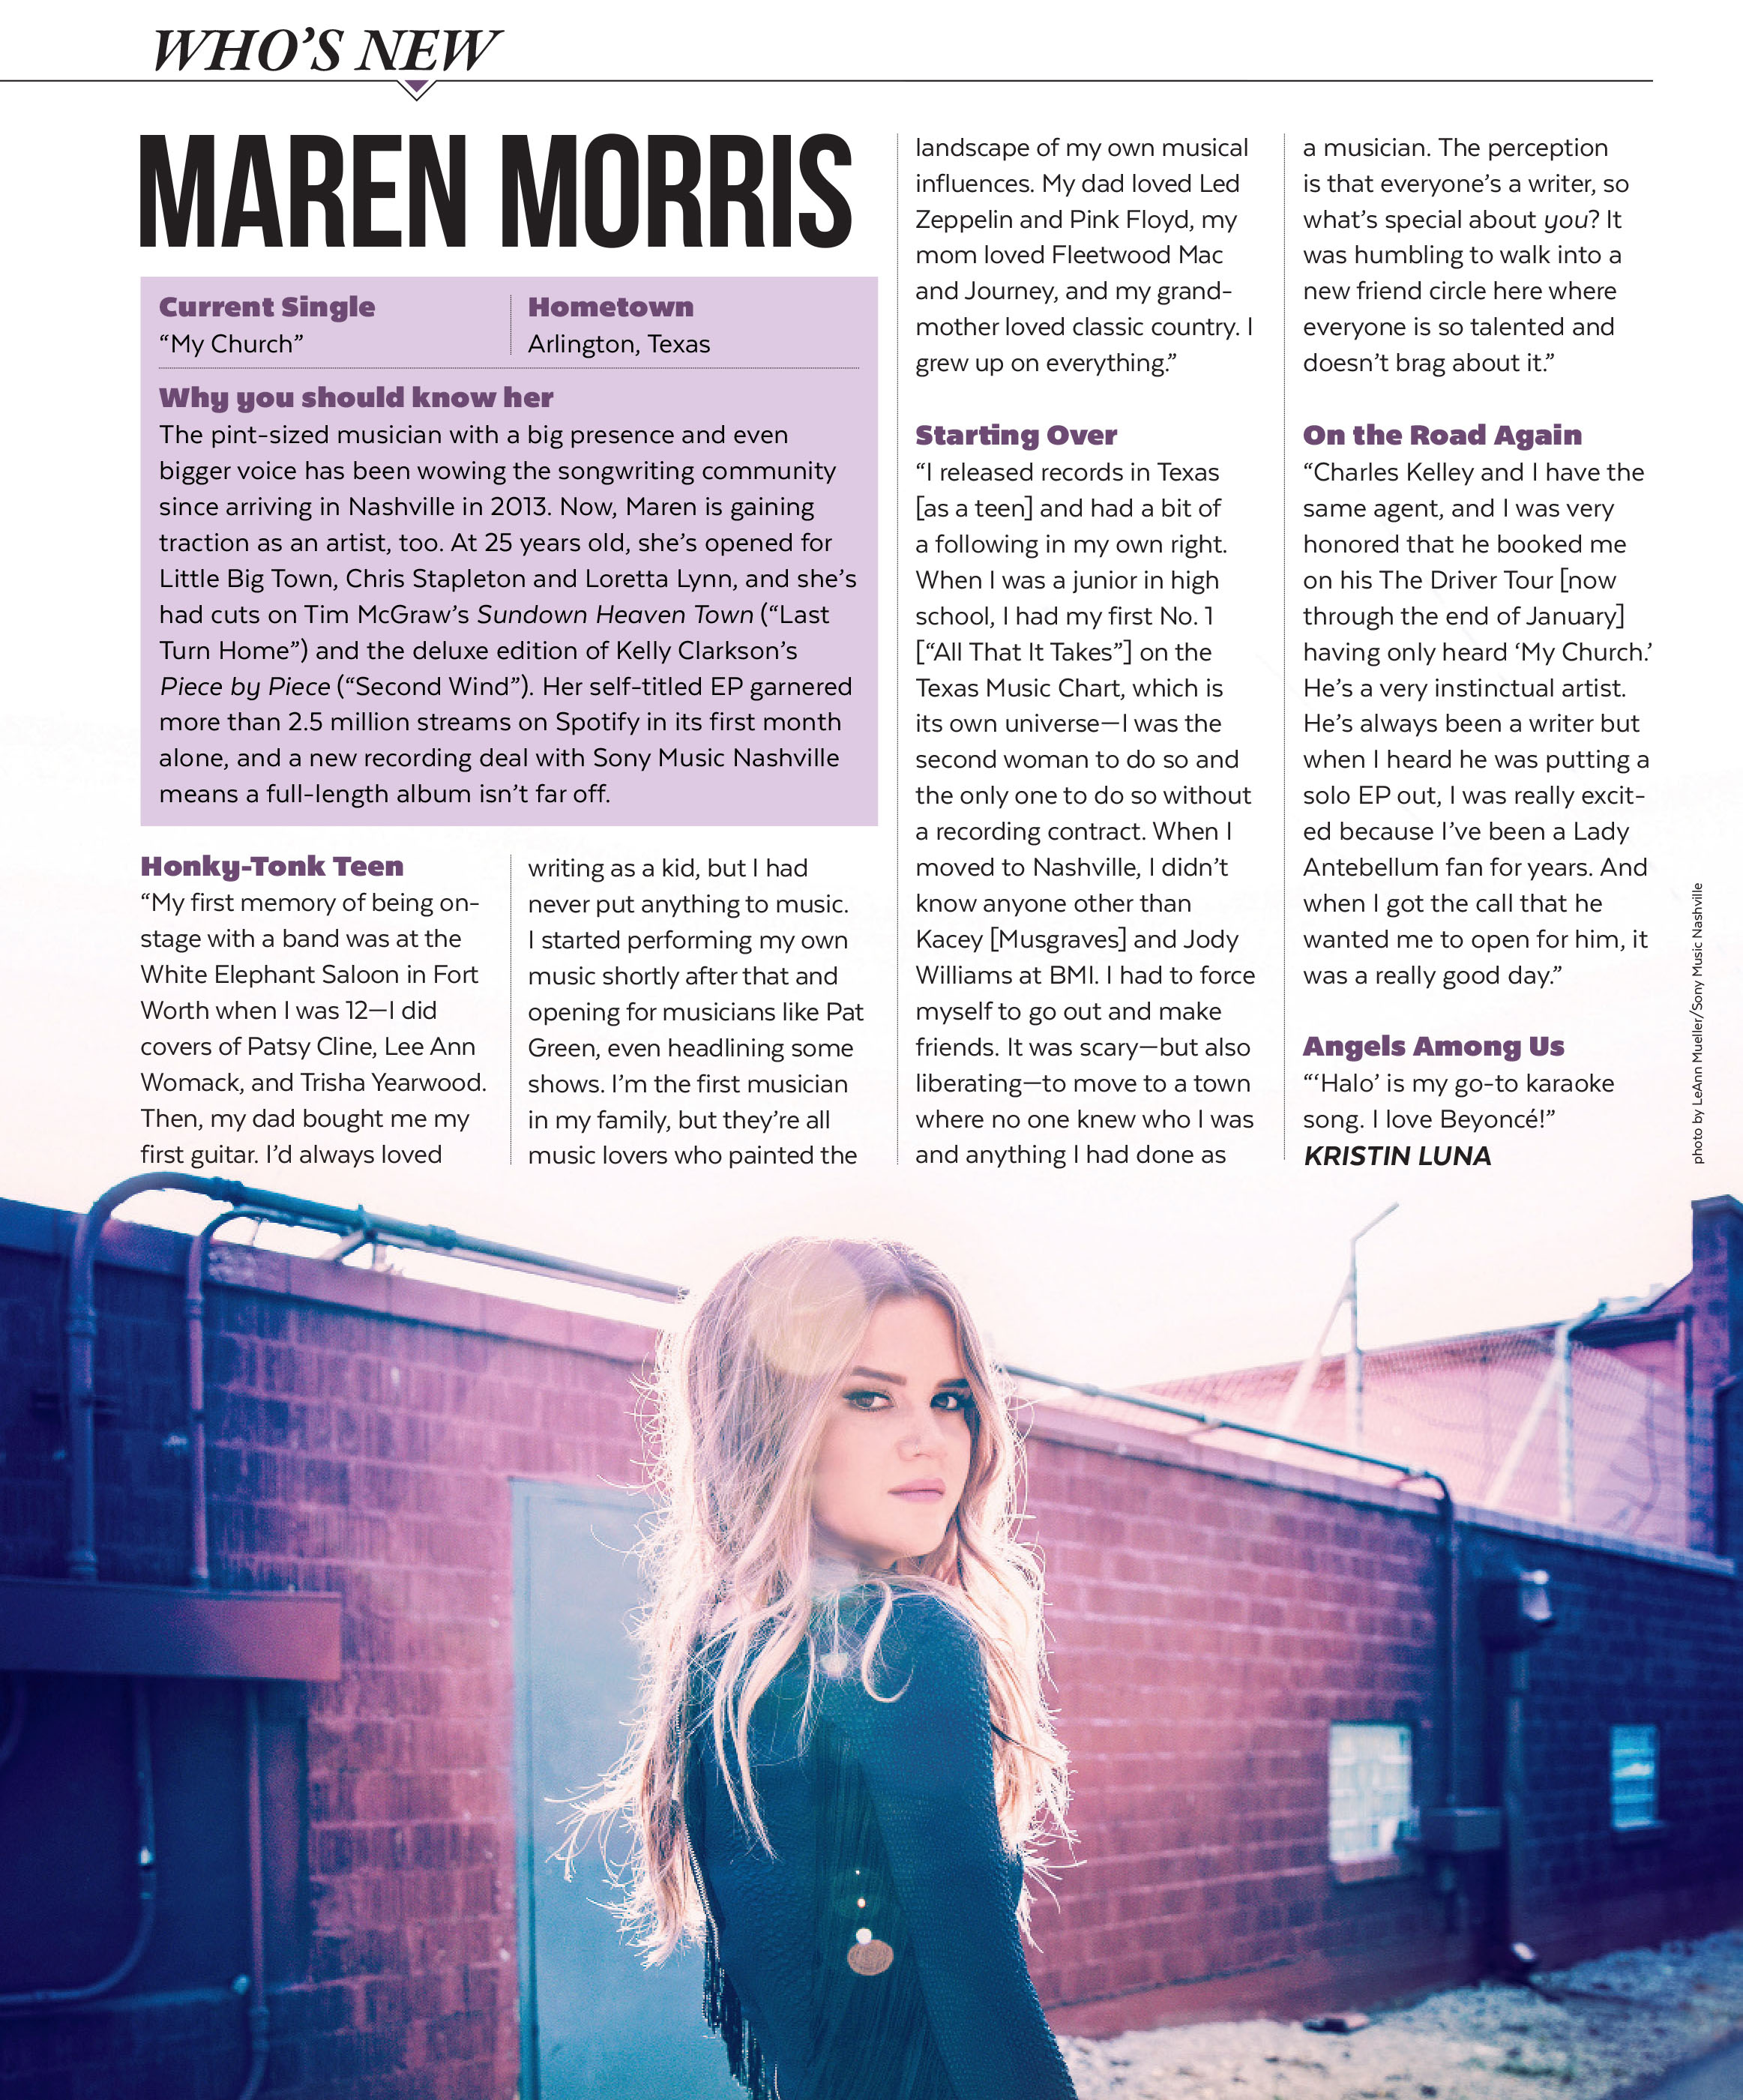 Maren Morris for Country Weekly